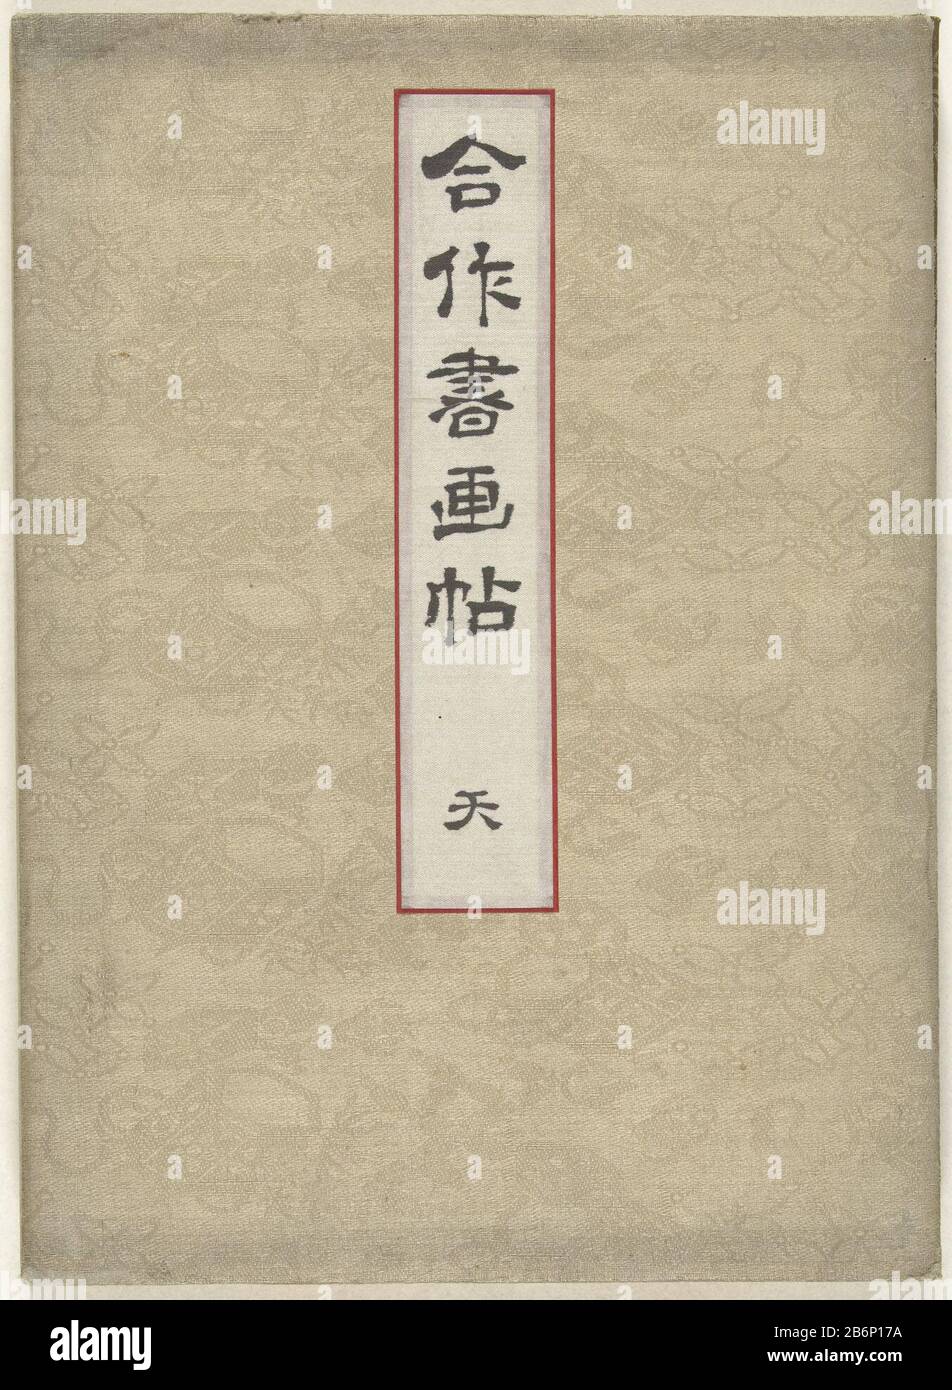 Gezamelijke penseelstreken Gassaku shogacho (titel op object) Part one (three?); light yellow borkaten cover with top center of hand-written title strip; 49 sheets with calligraphy Where: at images of people, animals, landscapes, still lifes by many different kunstenaars. Manufacturer : printmaker: Shibata Zeshin (listed building) printmaker: Kawanabe Kyosai (listed building) printmaker: Iijima Koga (listed building) printmaker: Okuhara Seiko (listed property) Place manufacture: Japan Date: approx 1880 Physical characteristics: color woodcut material: paper Technique: color woodblock dimension Stock Photo